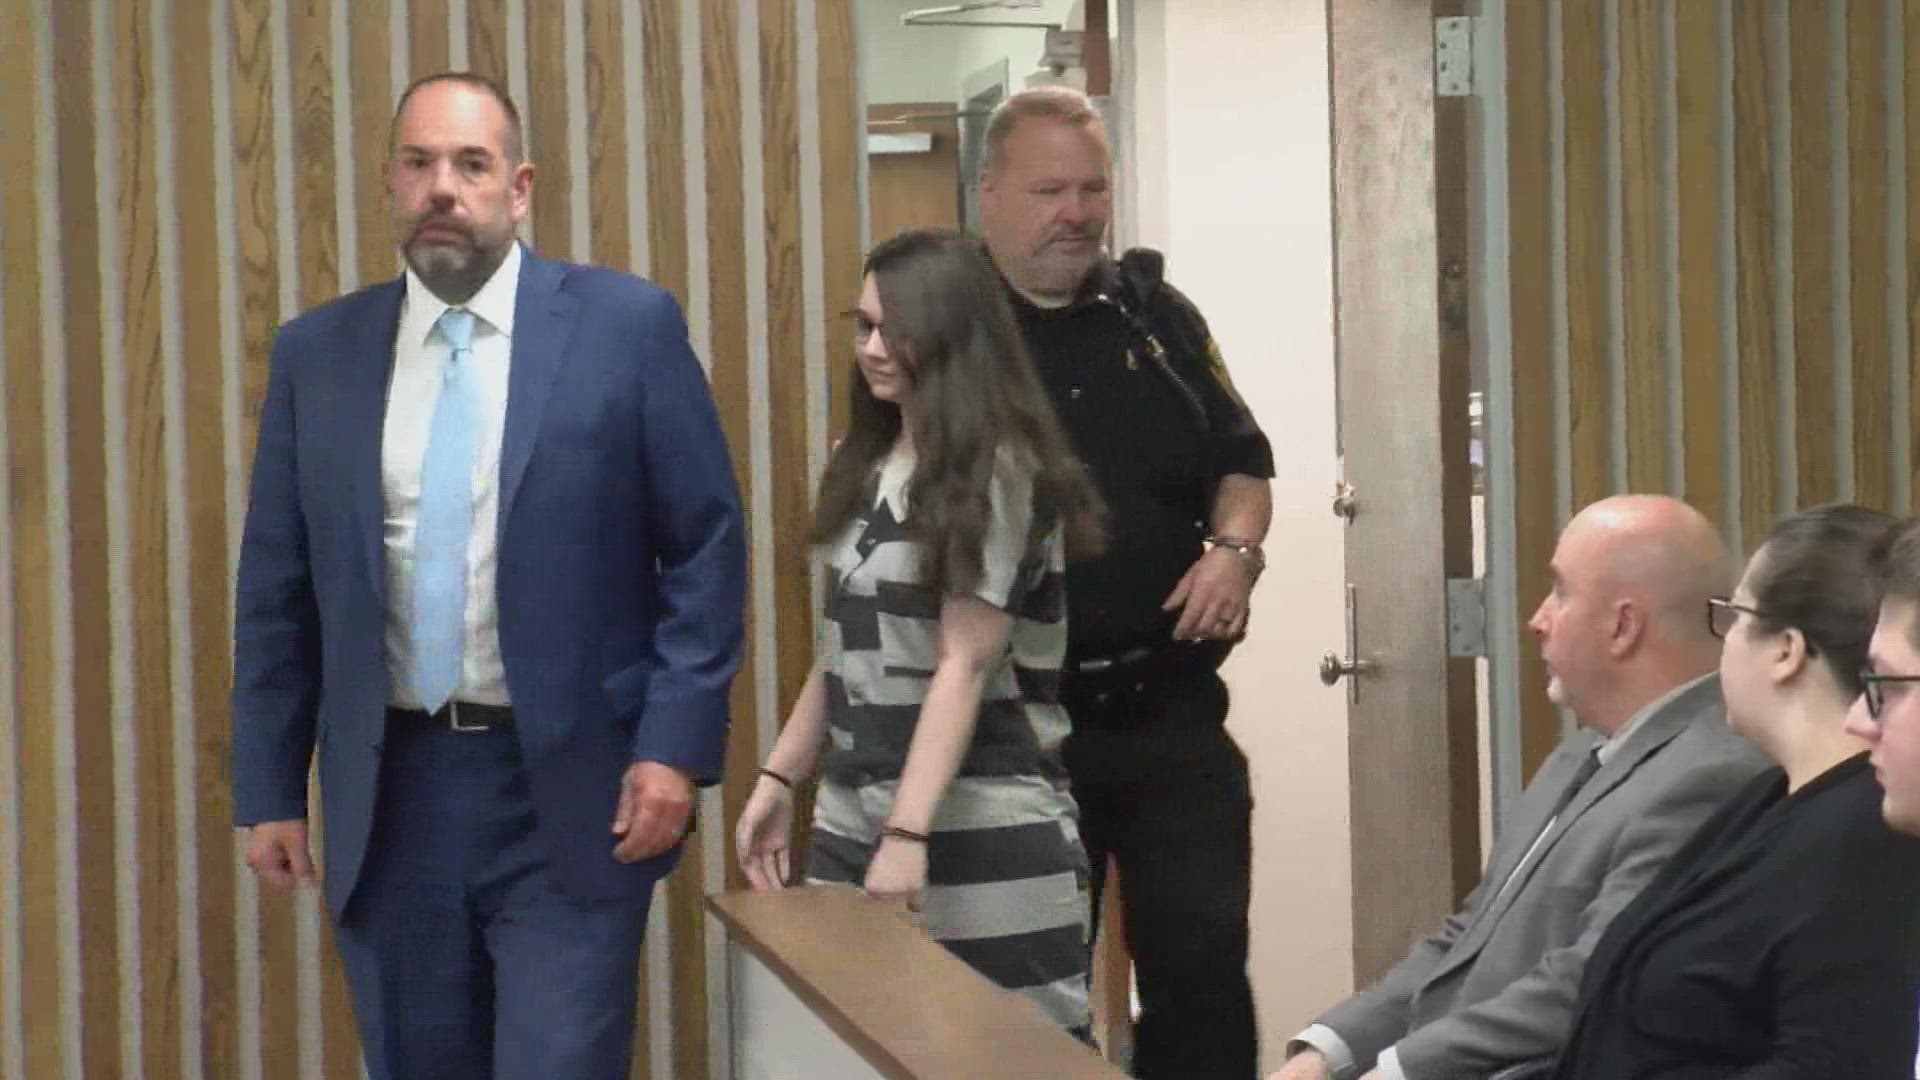 Megan Boswell, the mother accused in 2020 of murdering her 15-month-old daughter, Evelyn Boswell, will face trial in 2025.